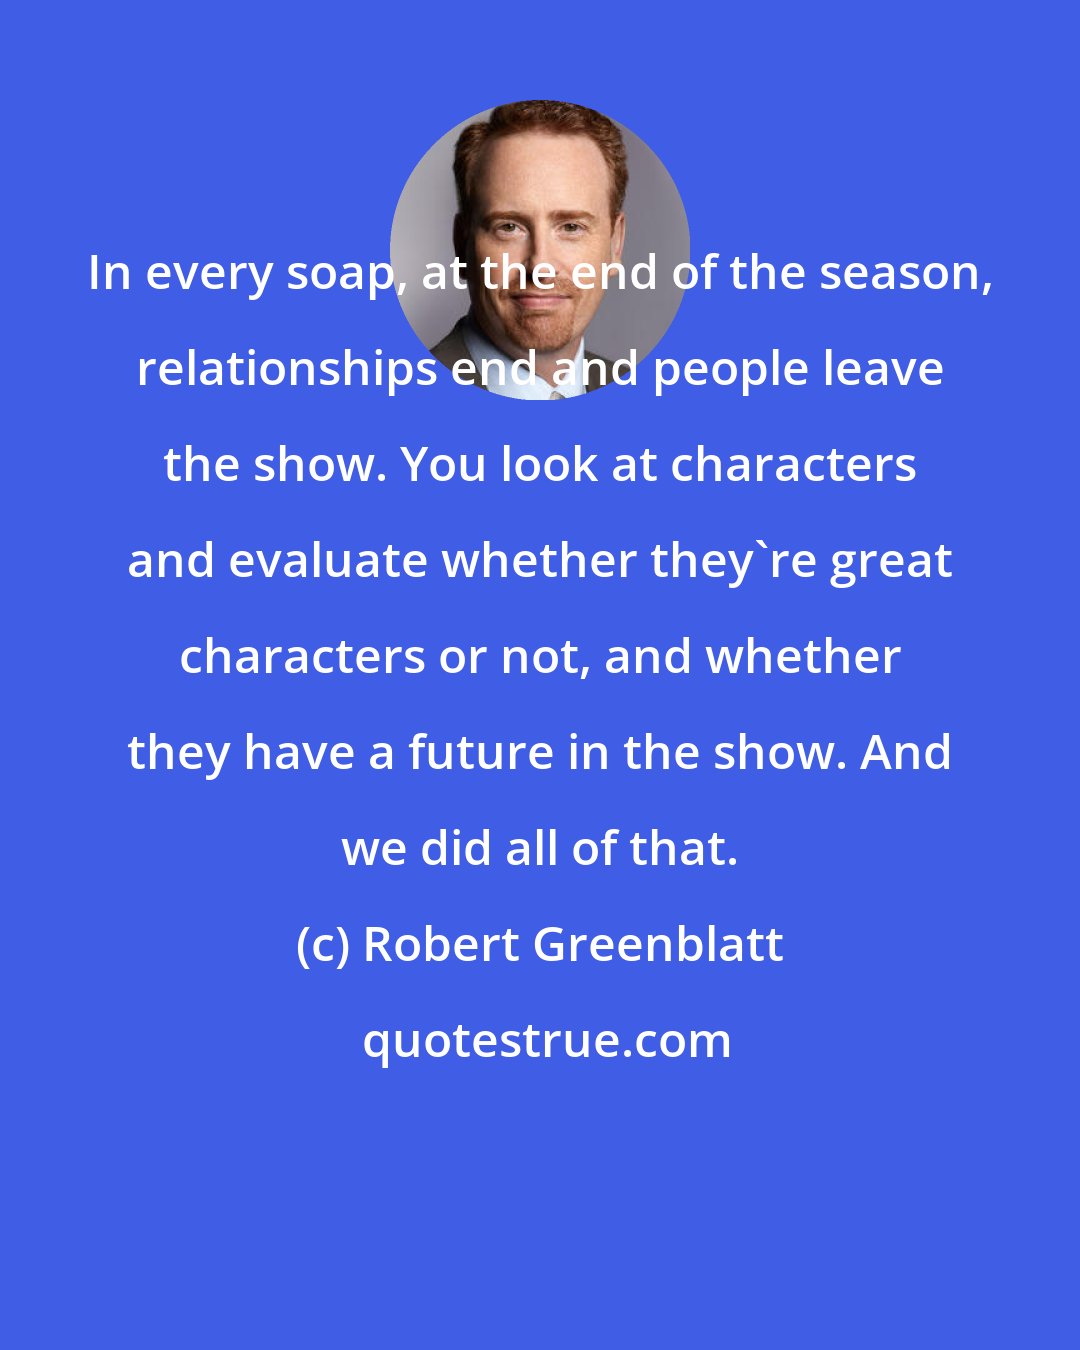 Robert Greenblatt: In every soap, at the end of the season, relationships end and people leave the show. You look at characters and evaluate whether they're great characters or not, and whether they have a future in the show. And we did all of that.